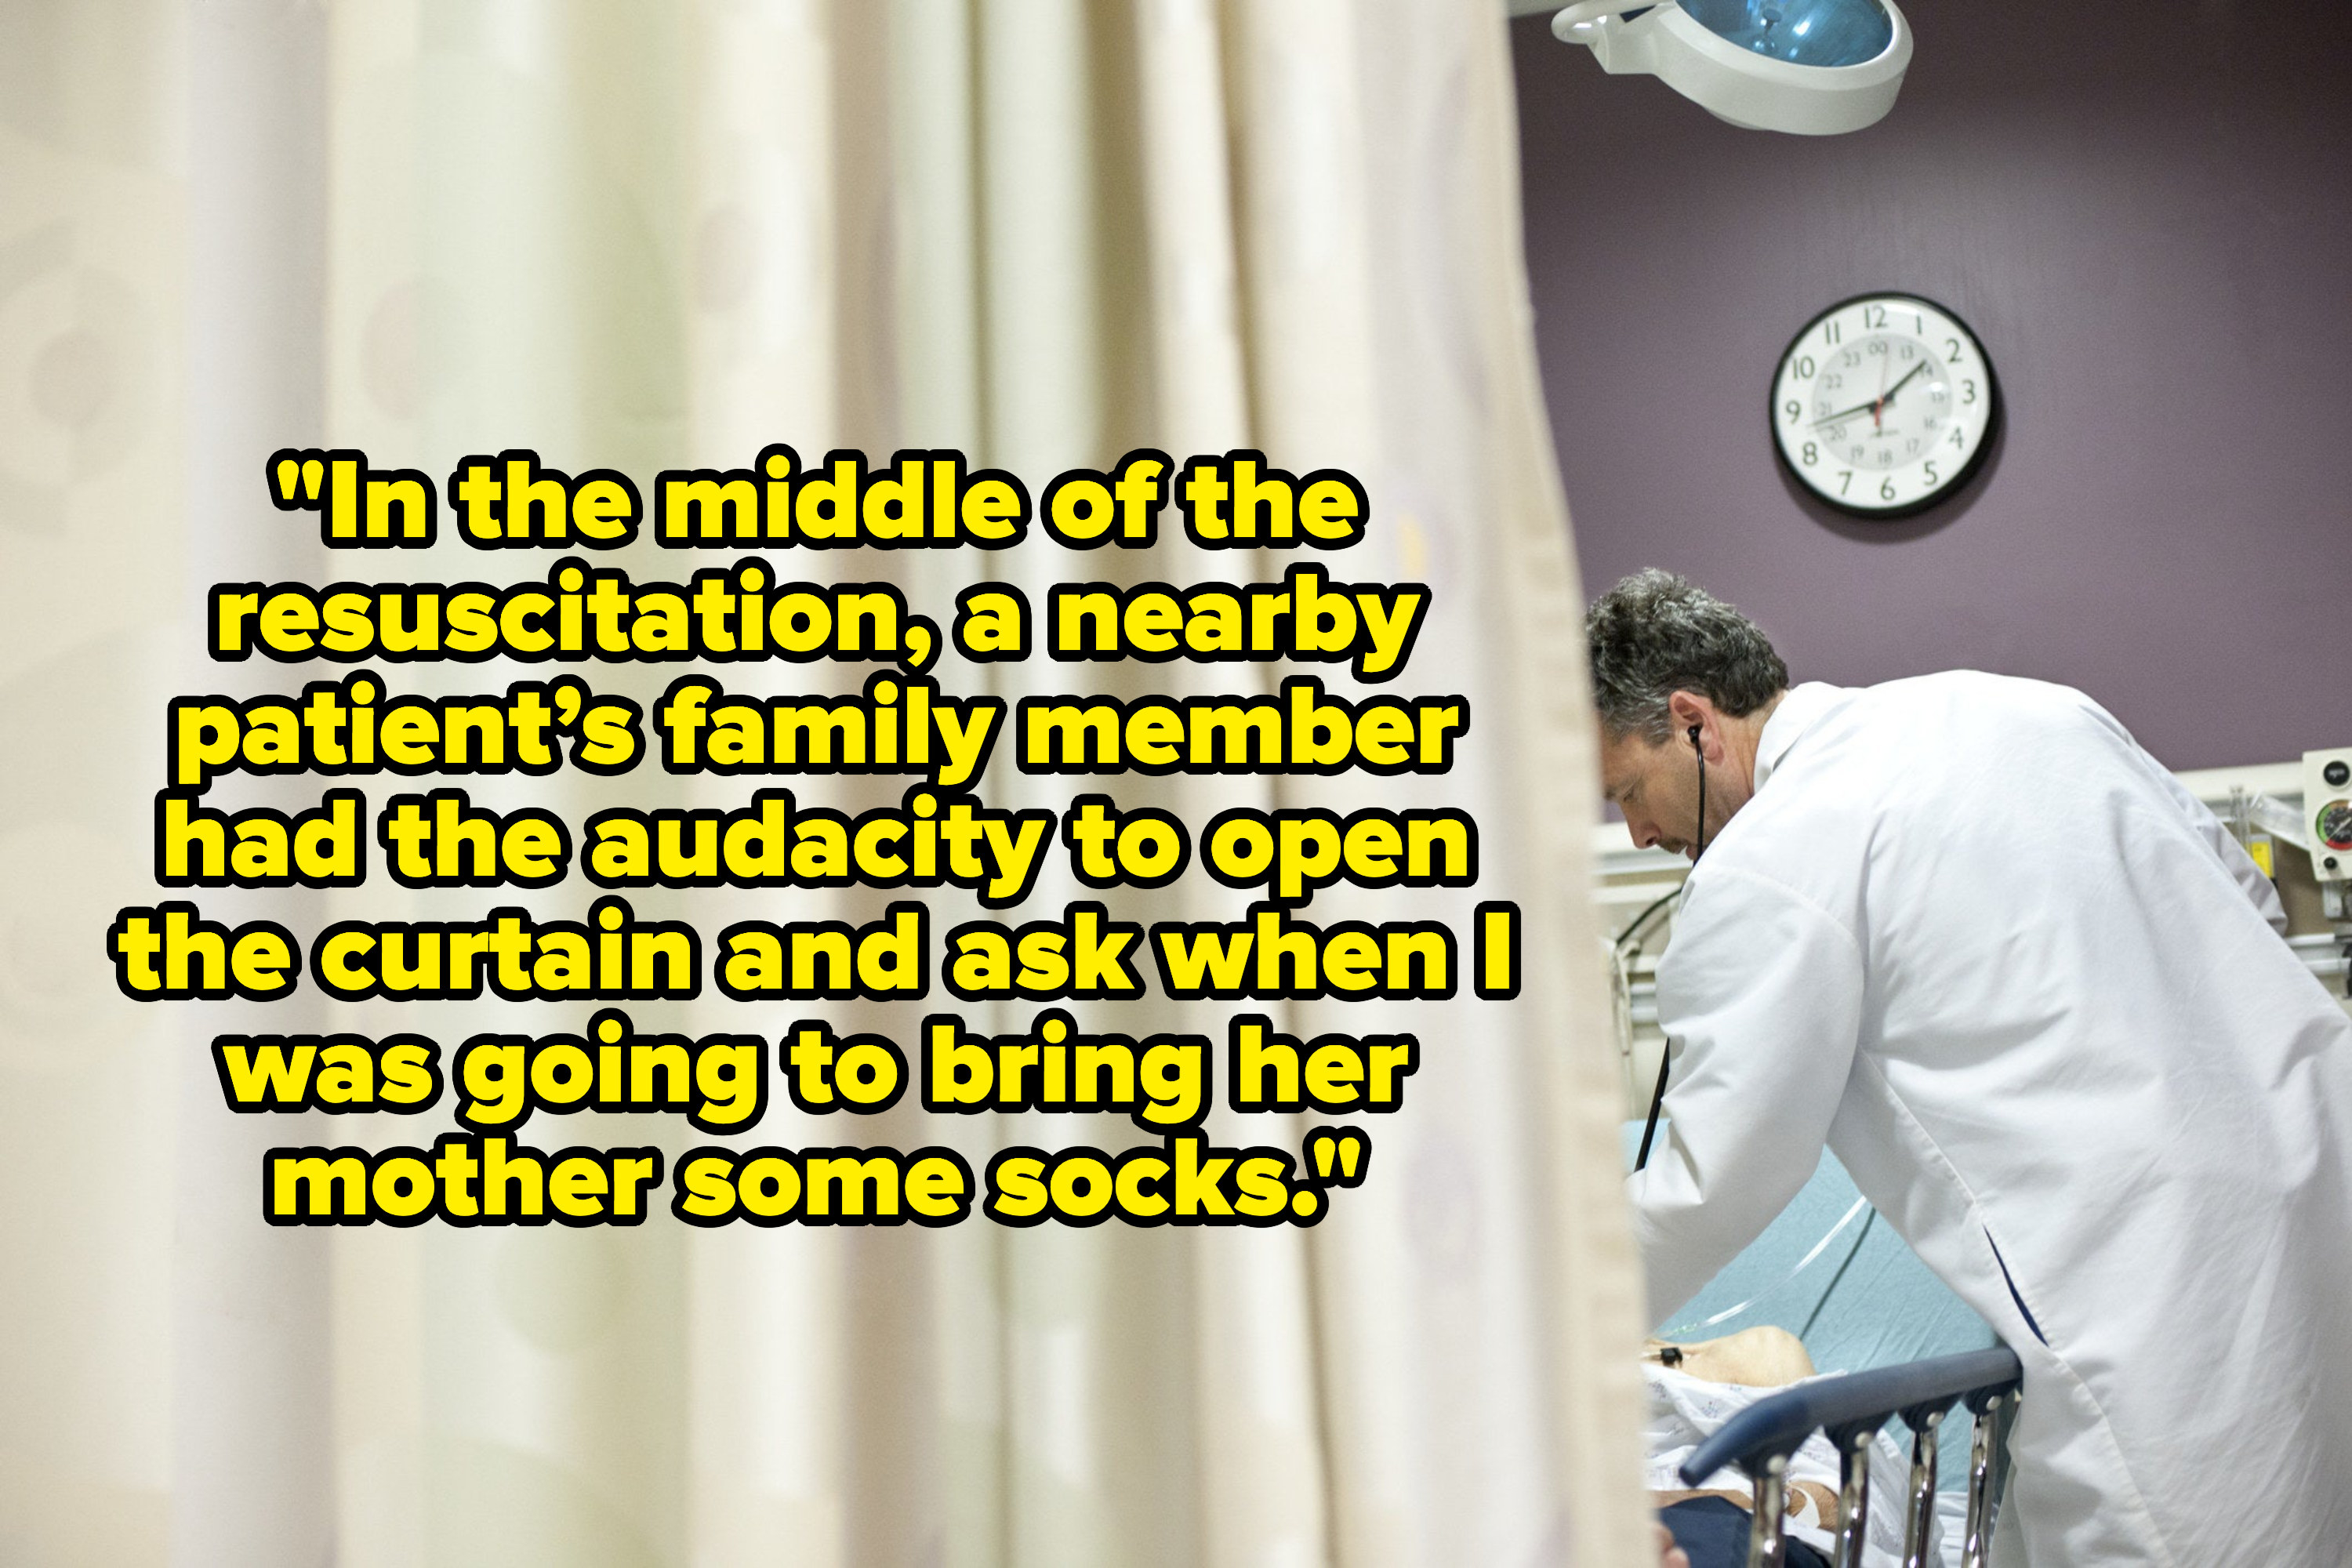 curtain in a hospital room with a doctor on the other side, with the text &quot;In the middle of the resuscitation, a nearby patient’s family member had the audacity to open the curtain and ask when I was going to bring her mother some socks&quot;